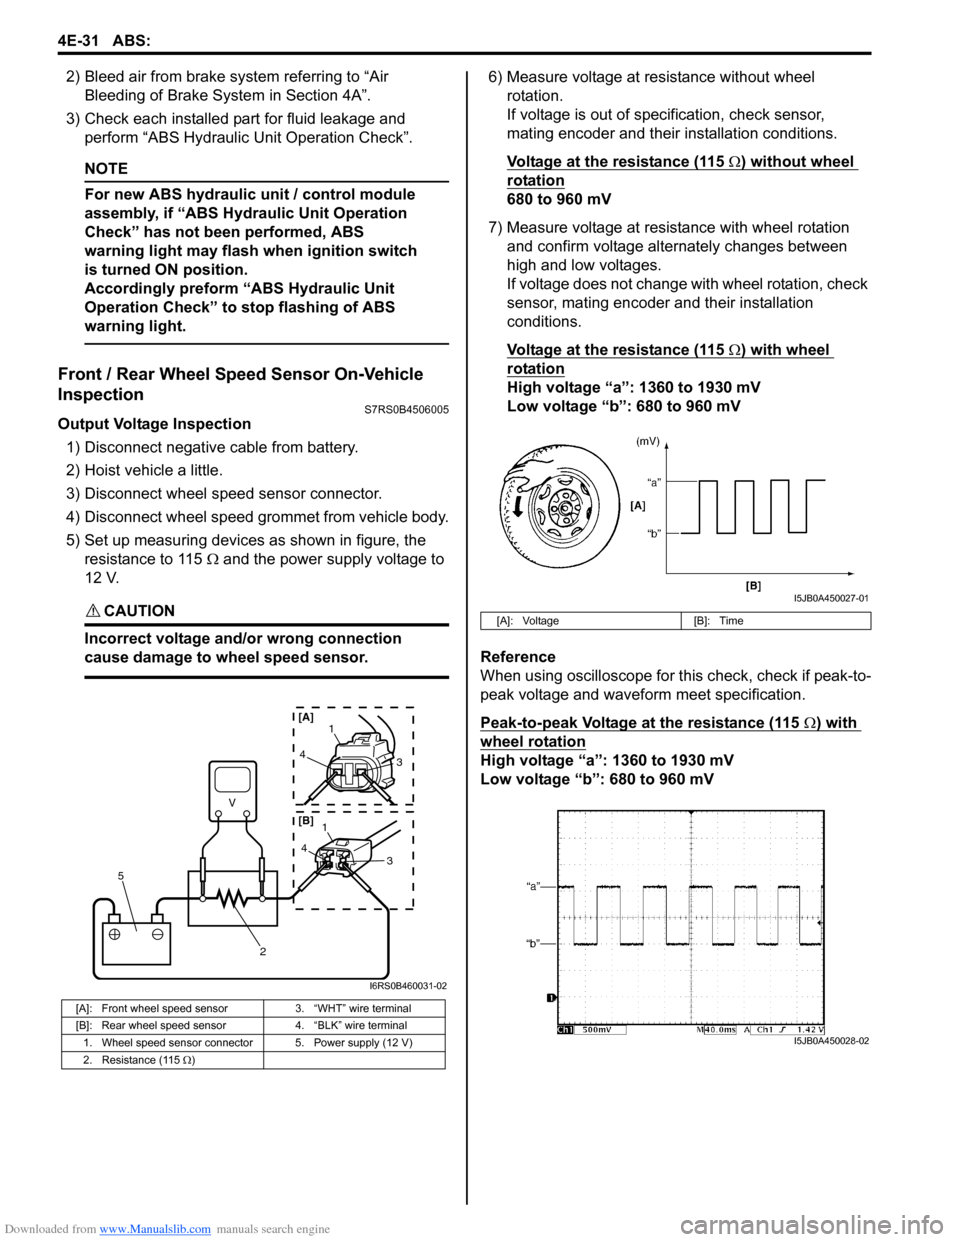 SUZUKI SWIFT 2008 2.G Service Workshop Manual Downloaded from www.Manualslib.com manuals search engine 4E-31 ABS: 
2) Bleed air from brake system referring to “Air Bleeding of Brake System in Section 4A”.
3) Check each installed part for flui